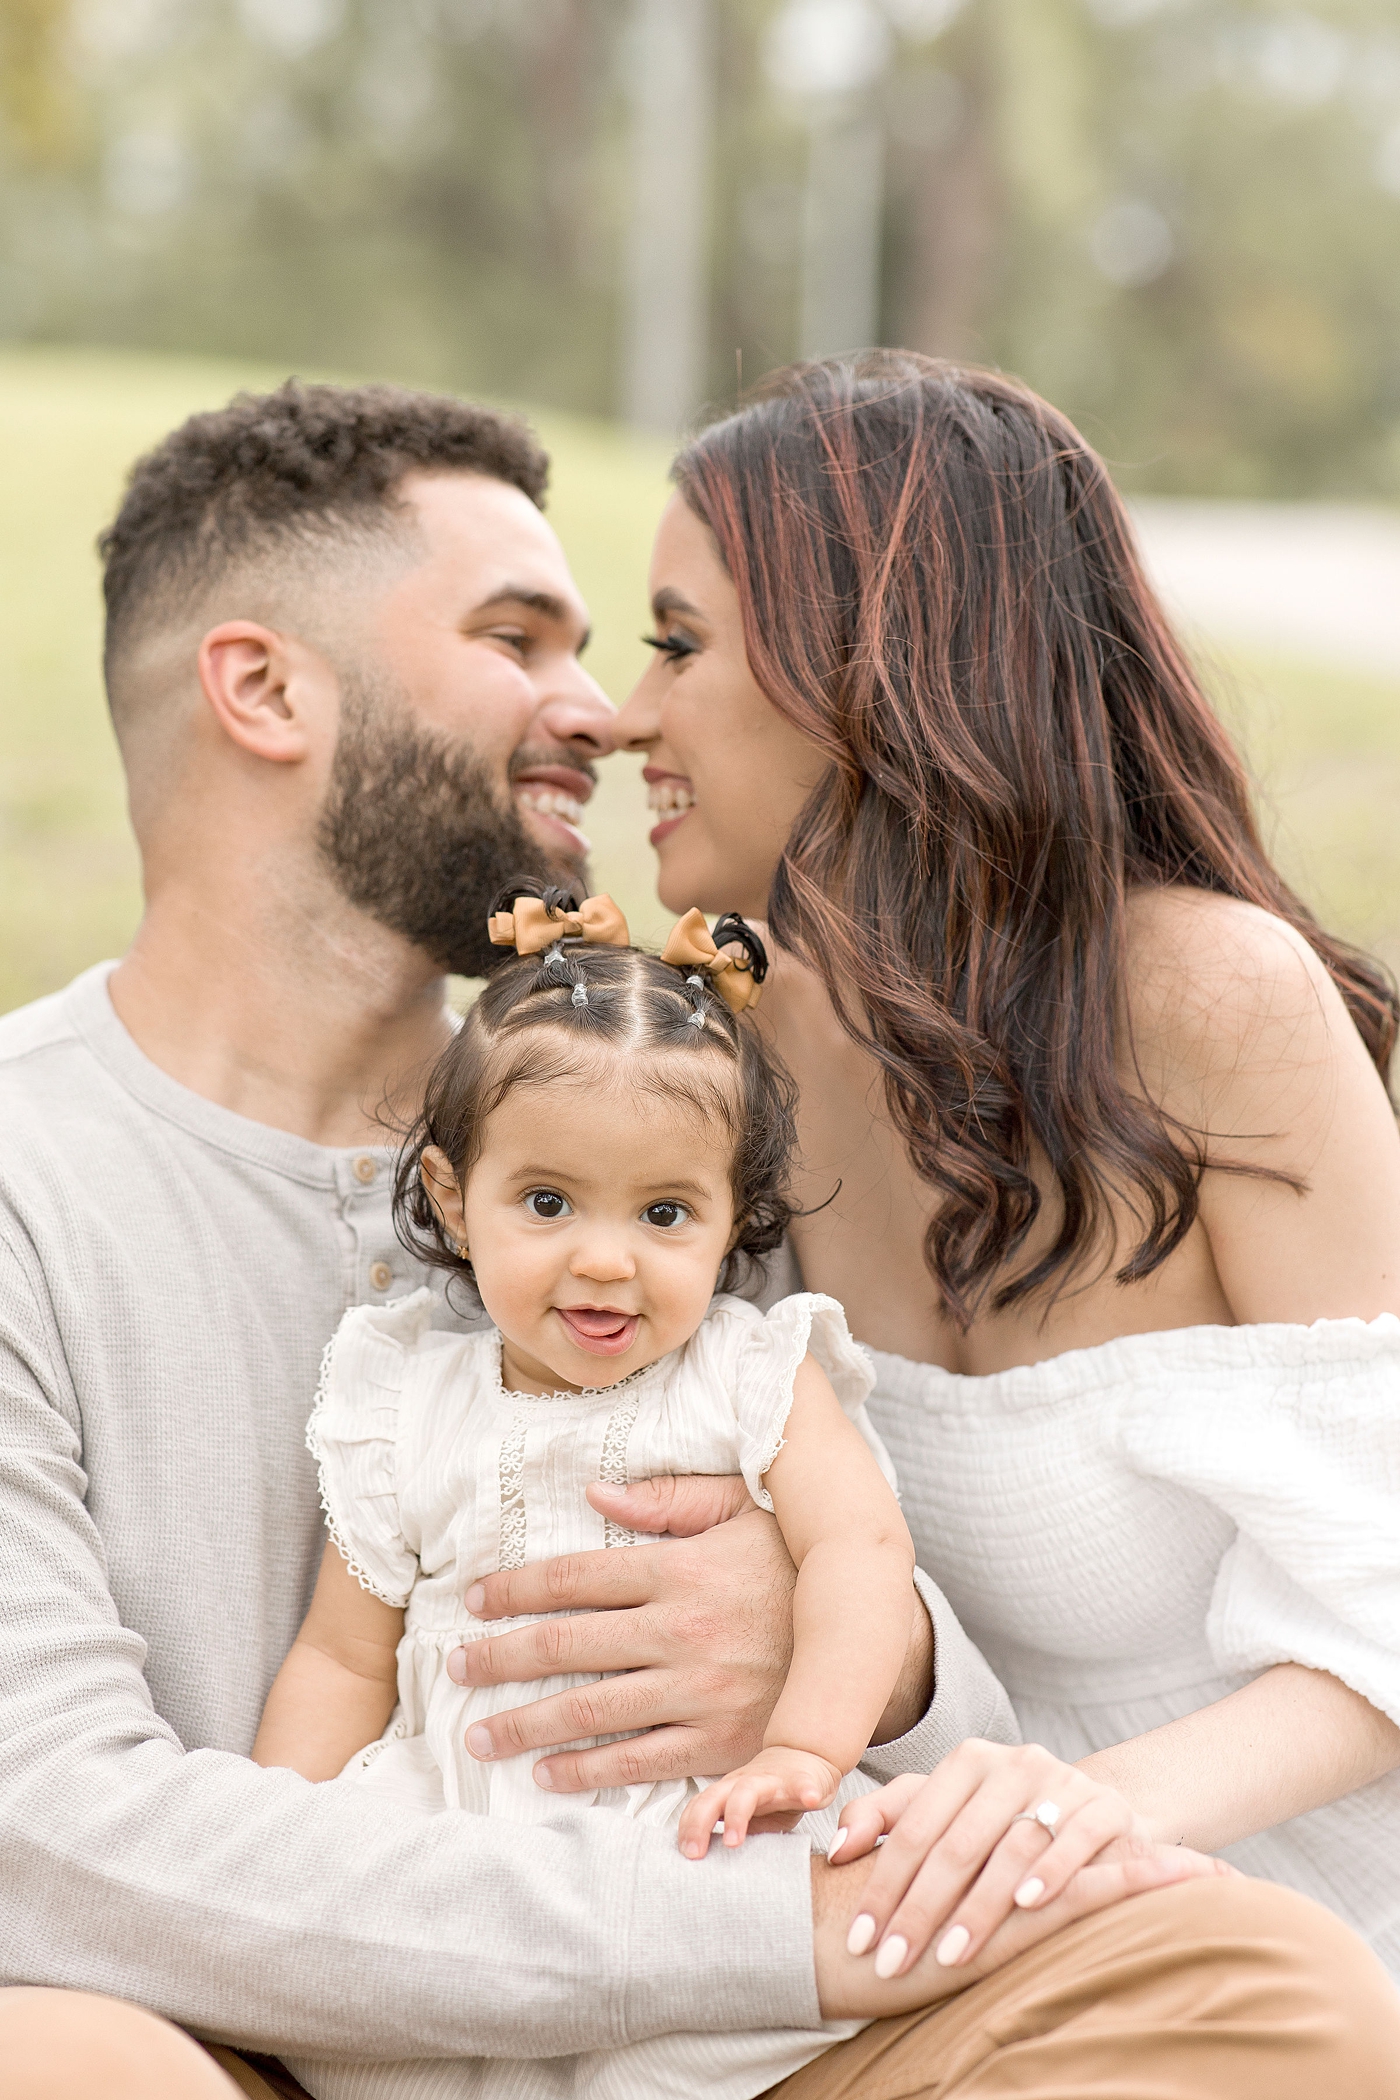 Dad and mom connect noses while baby grins for camera during baby photography miami session. Photo by Ivanna Vidal Photography.